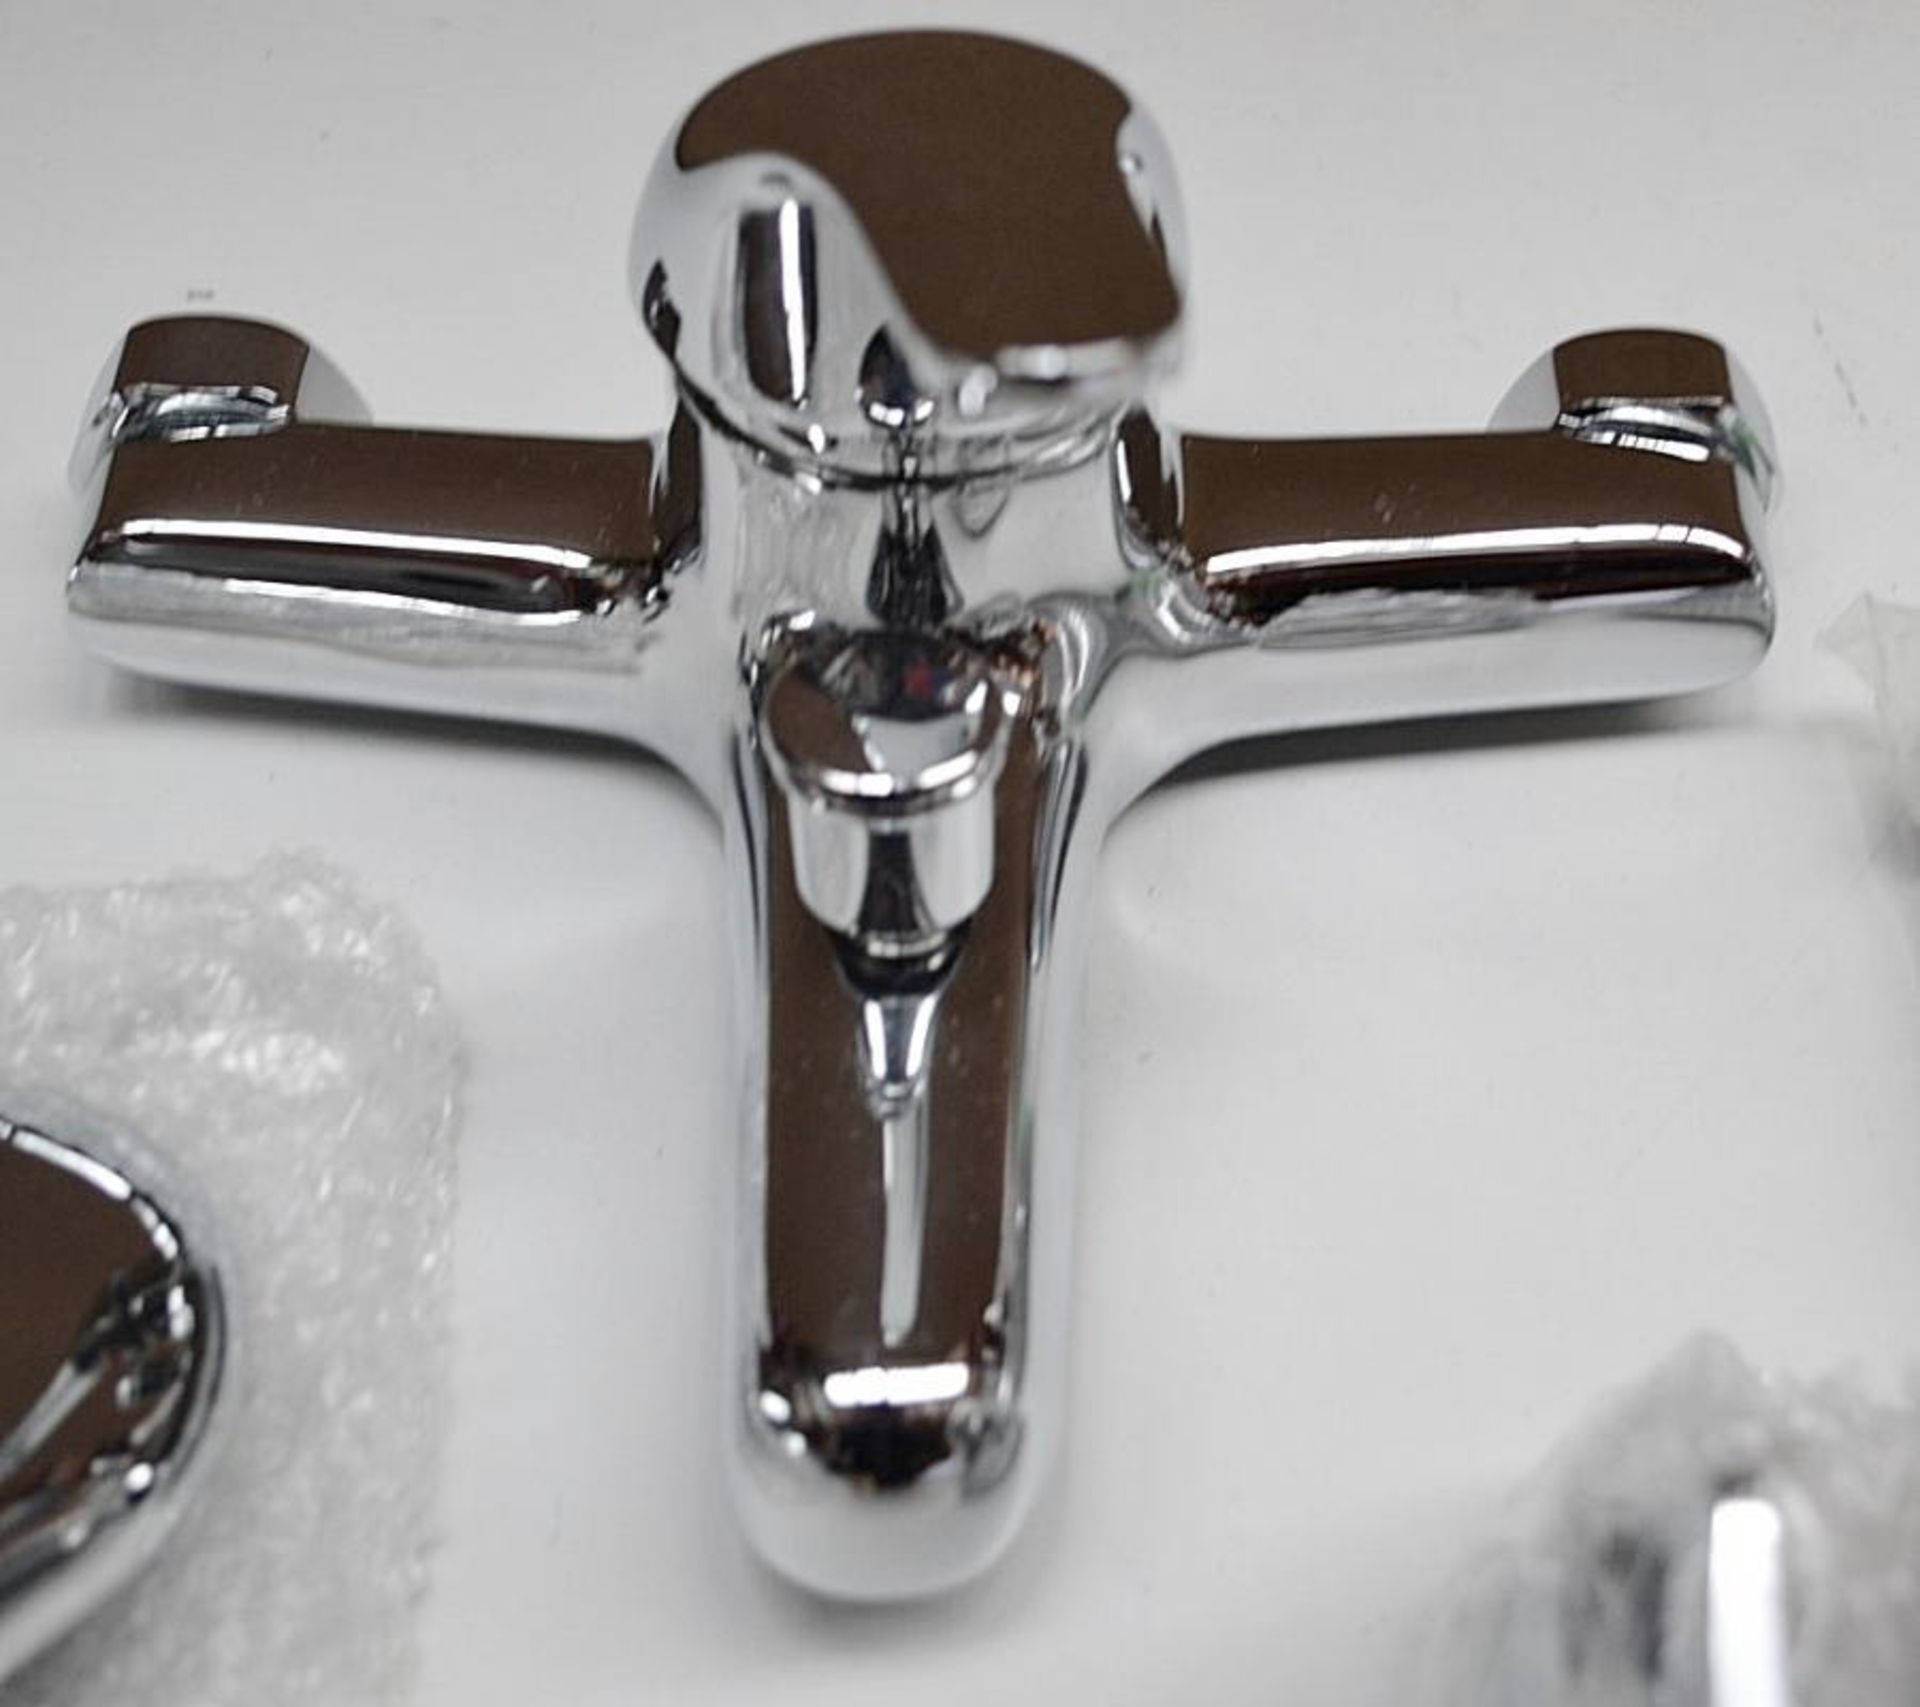 1 x PULSE Single Lever Bath Shower Mixer Tap In Chrome (Model: 112G2) - Ref: M188 - CL190 - Unused B - Image 6 of 7